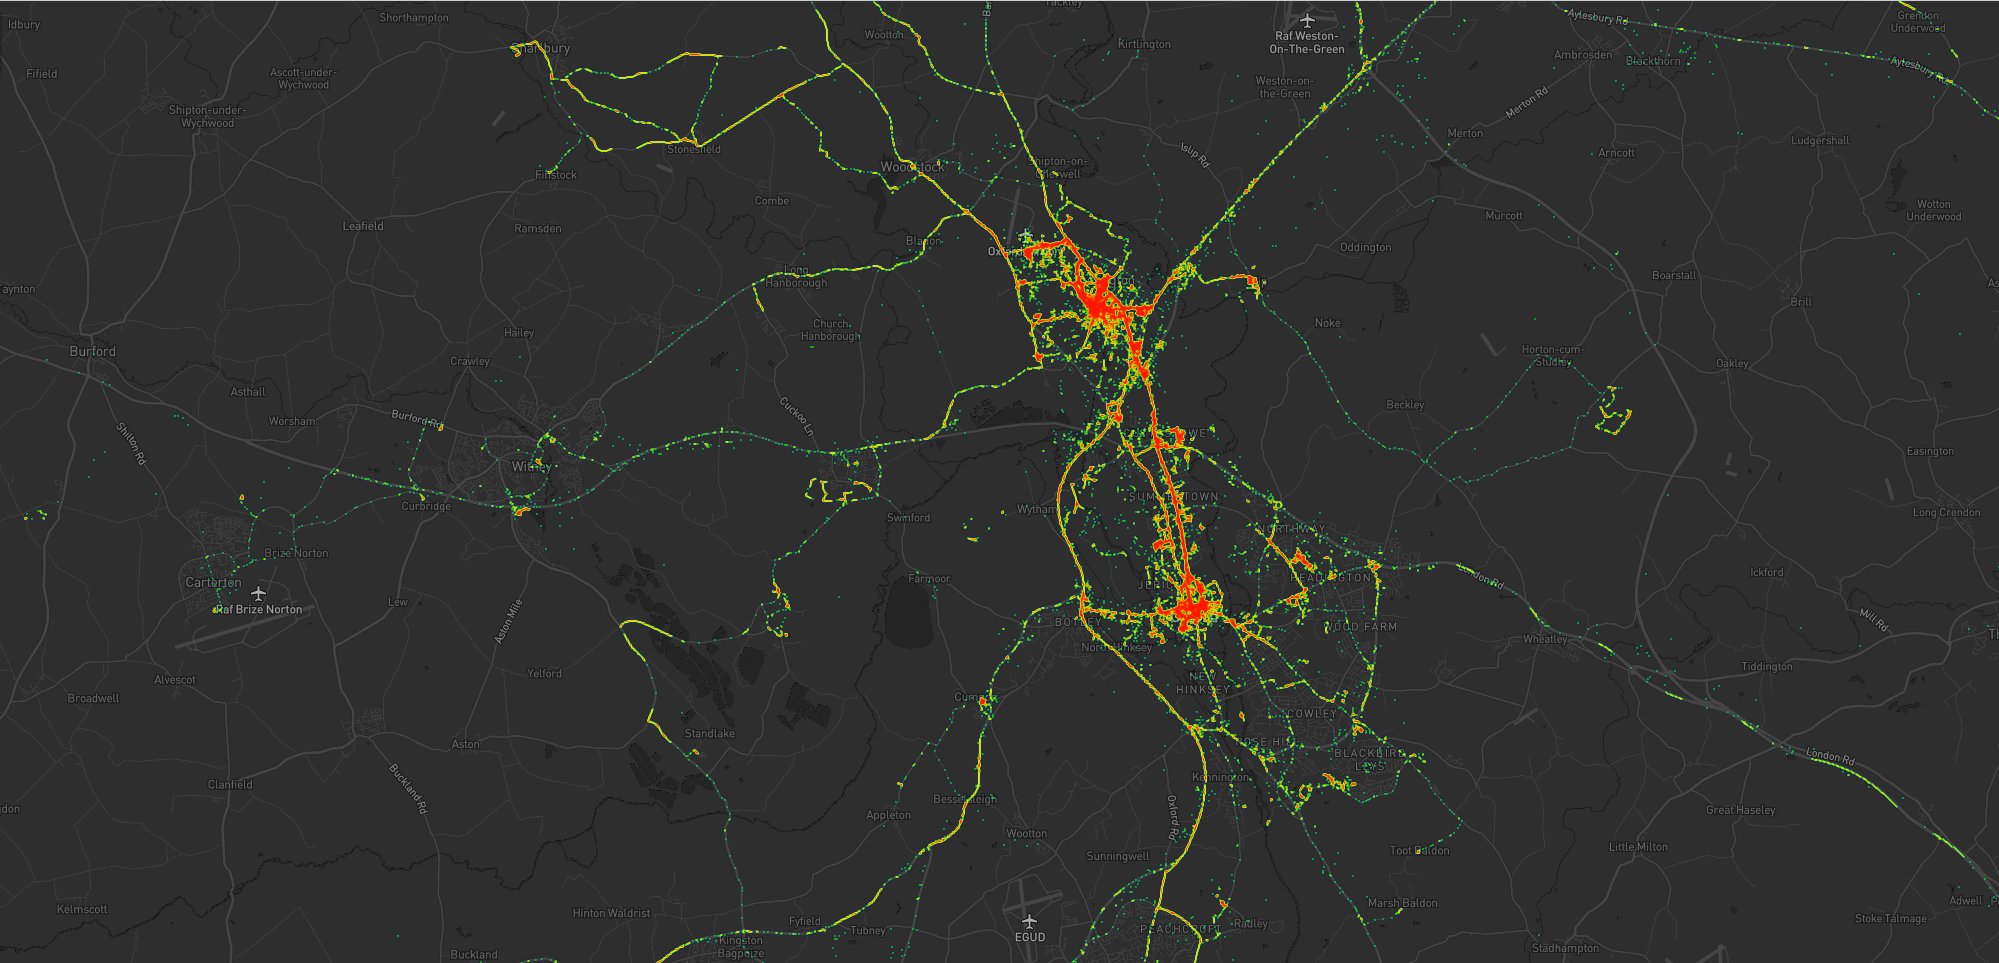 Heatmap showing Dan's movements around Kidlington, including a lot of time in the village and in Oxford City Centre, as well as hotspots at the hospital, parks, swimming pools, and places that Dan used to volunteer. Individual expeditions can also be identified.